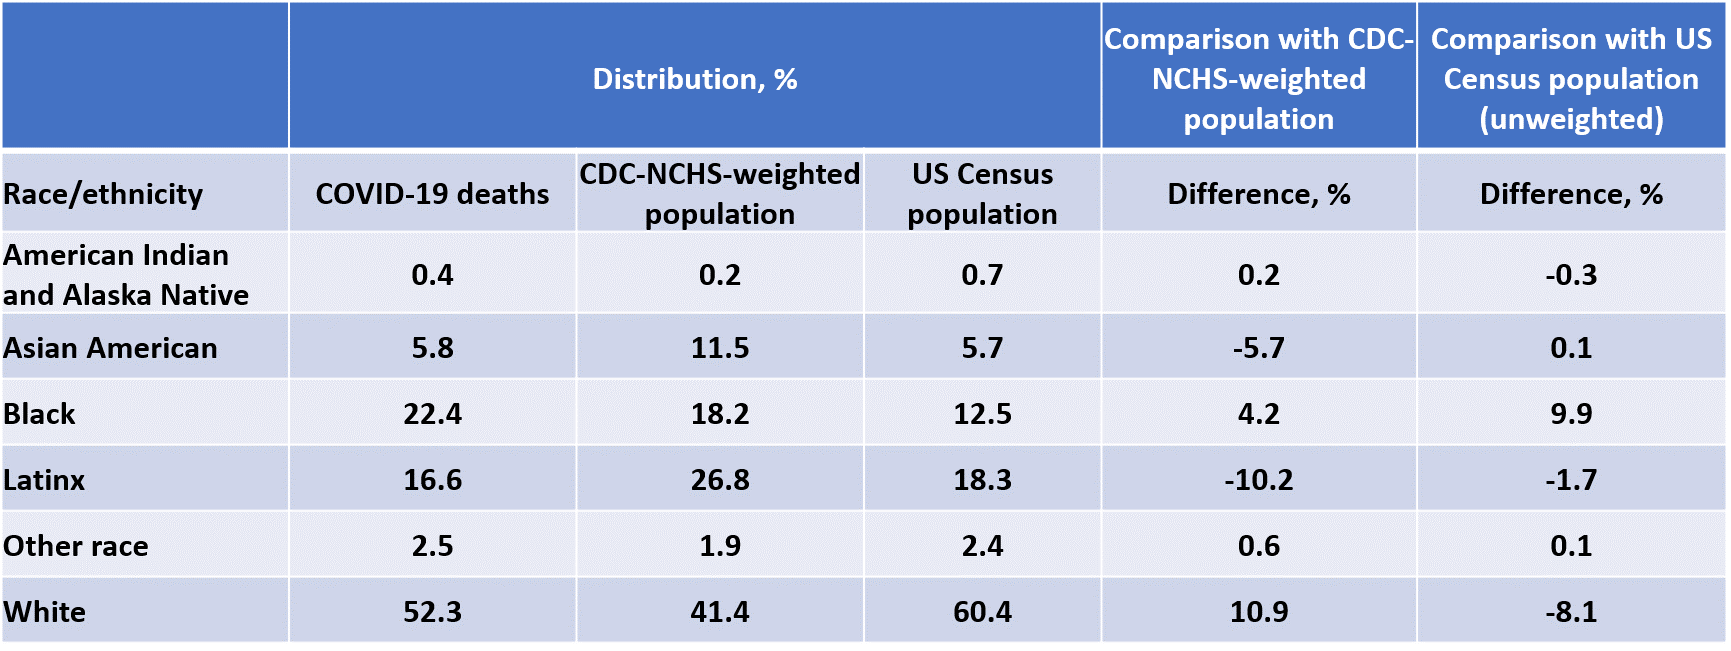 NCHS population weights incorporate the prevalence of COVID-19 in geographic units, whereas U.S. Census data do not. Use of weighted data leads to different population estimates of disparities than do unweighted data